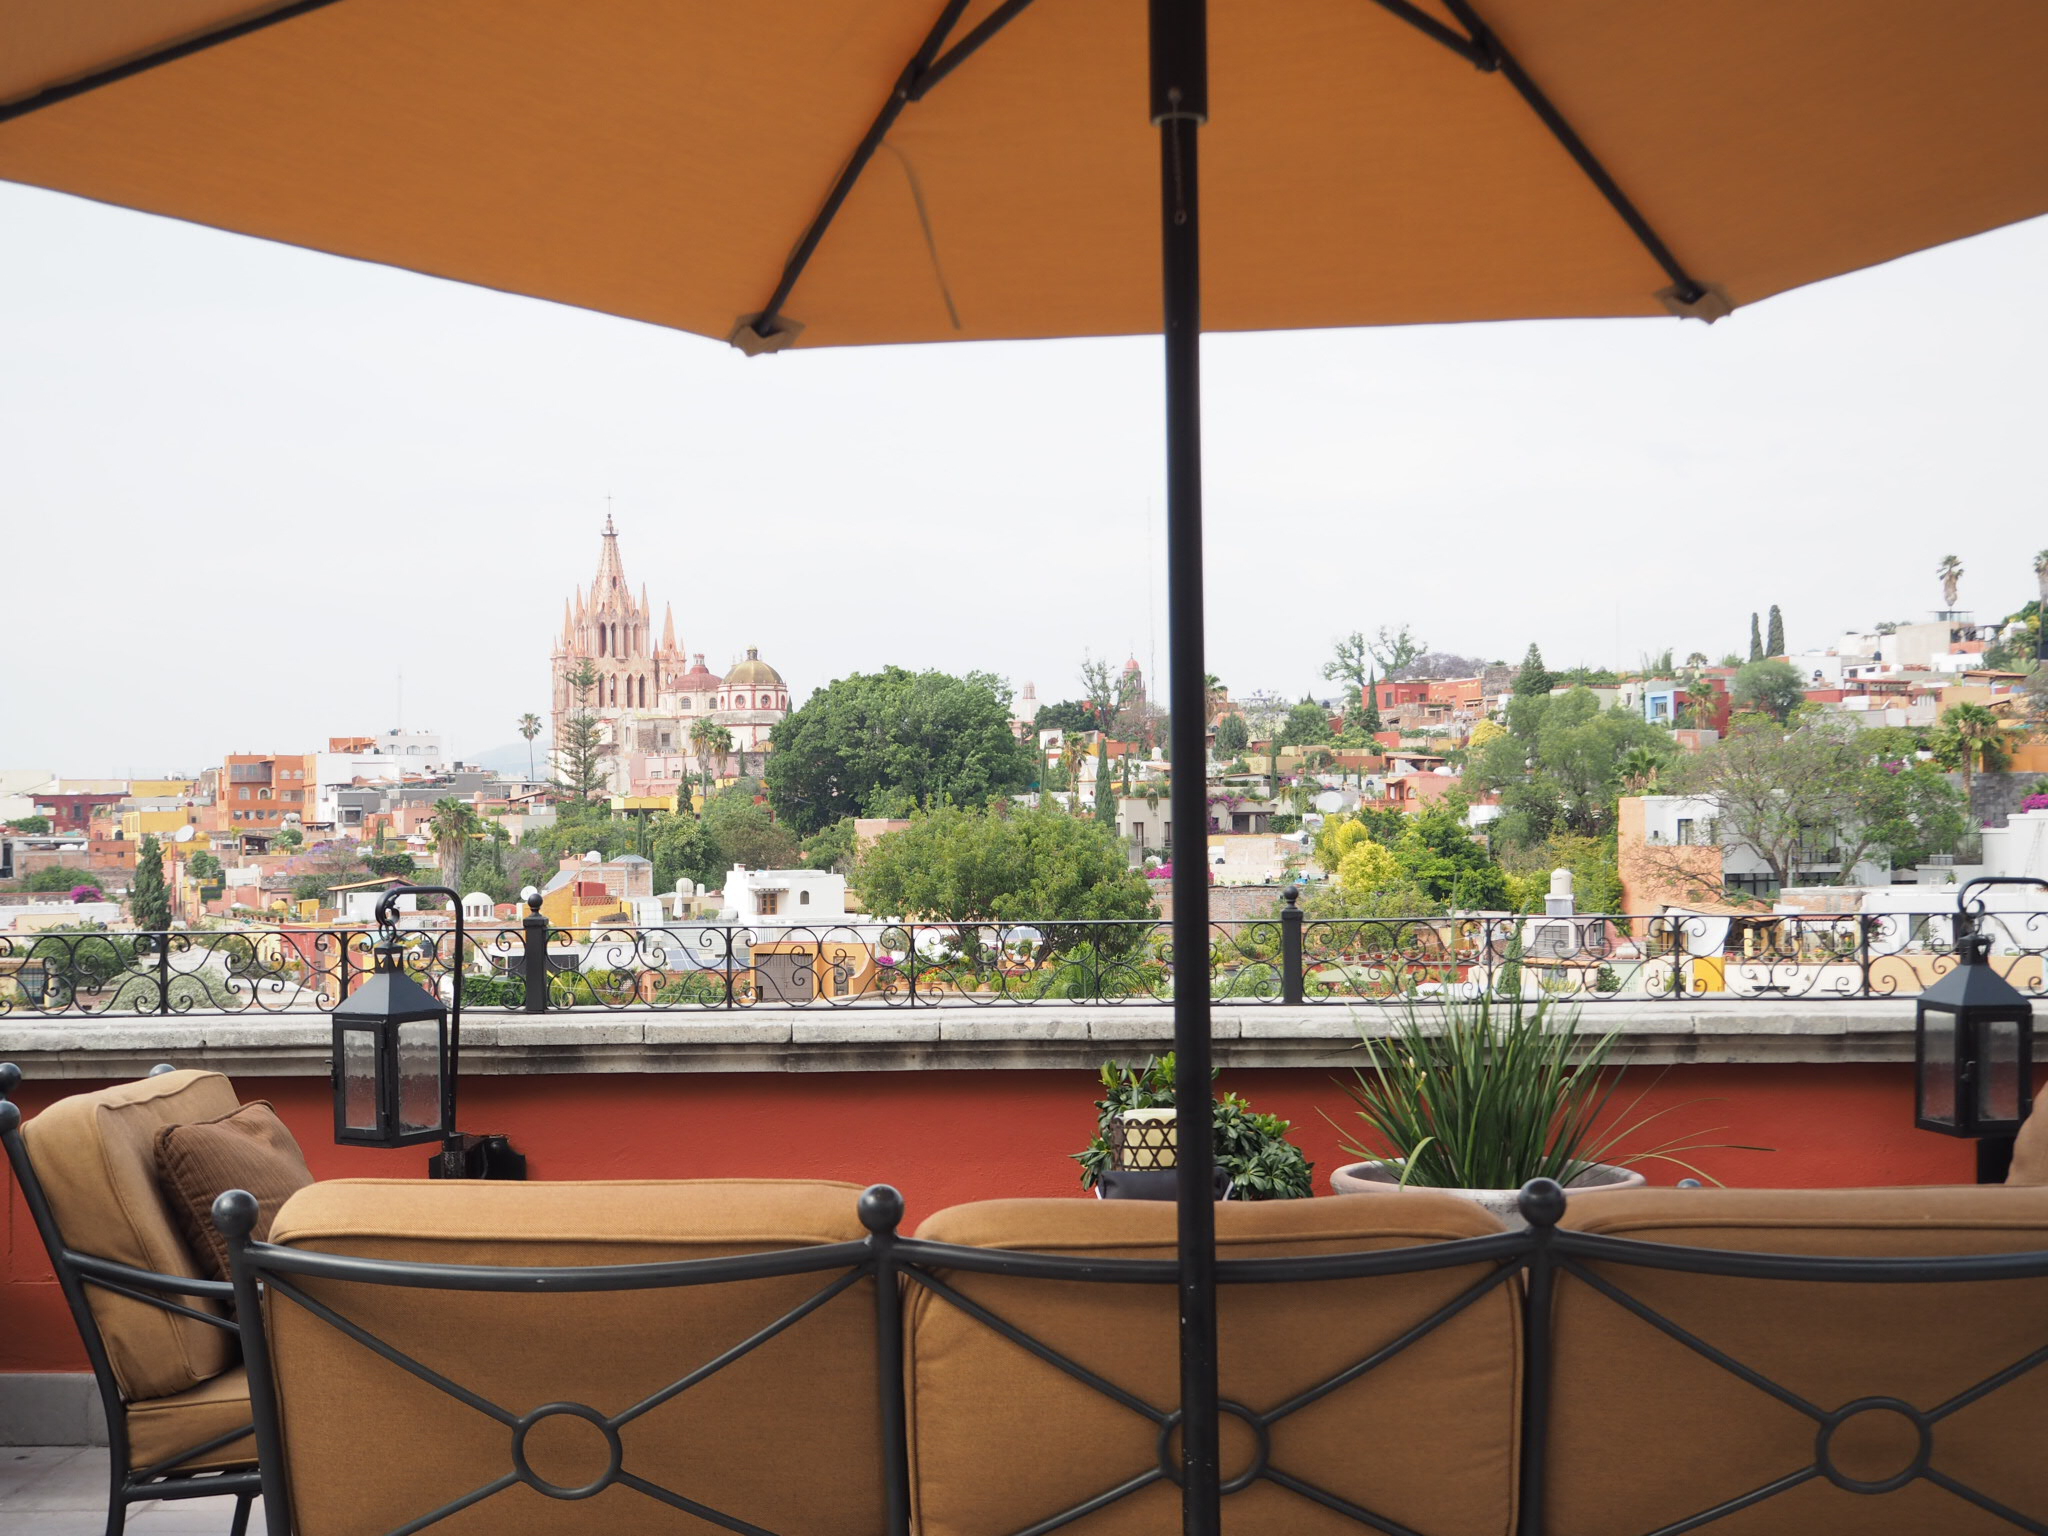 Travel Spotlight: San Miguel de Allende | The Hungry Chronicles